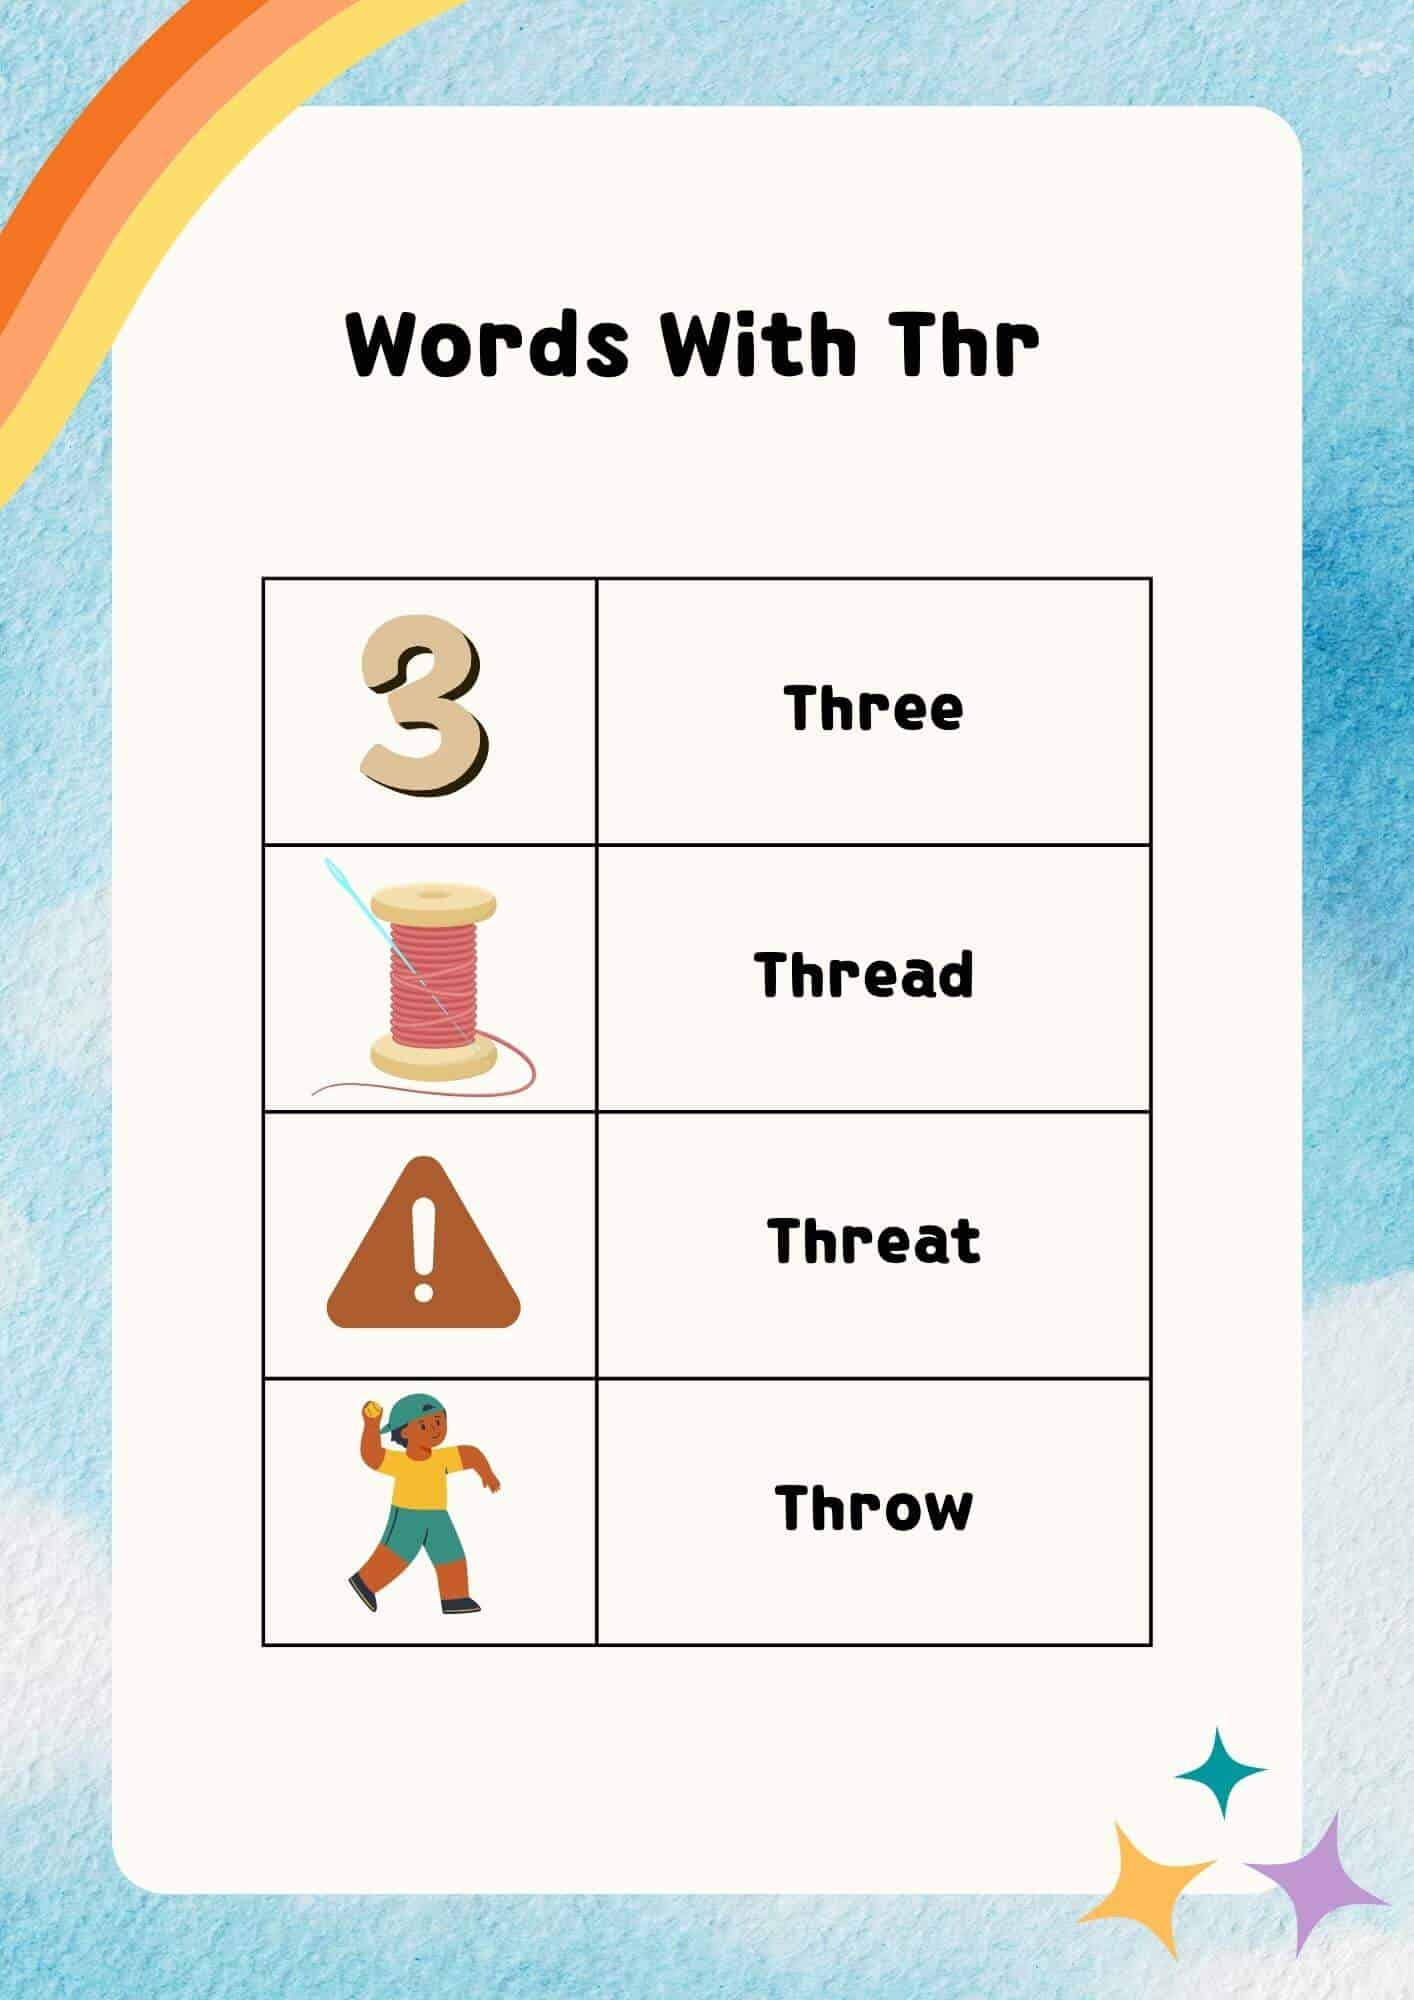 Words which helps learning  thr words